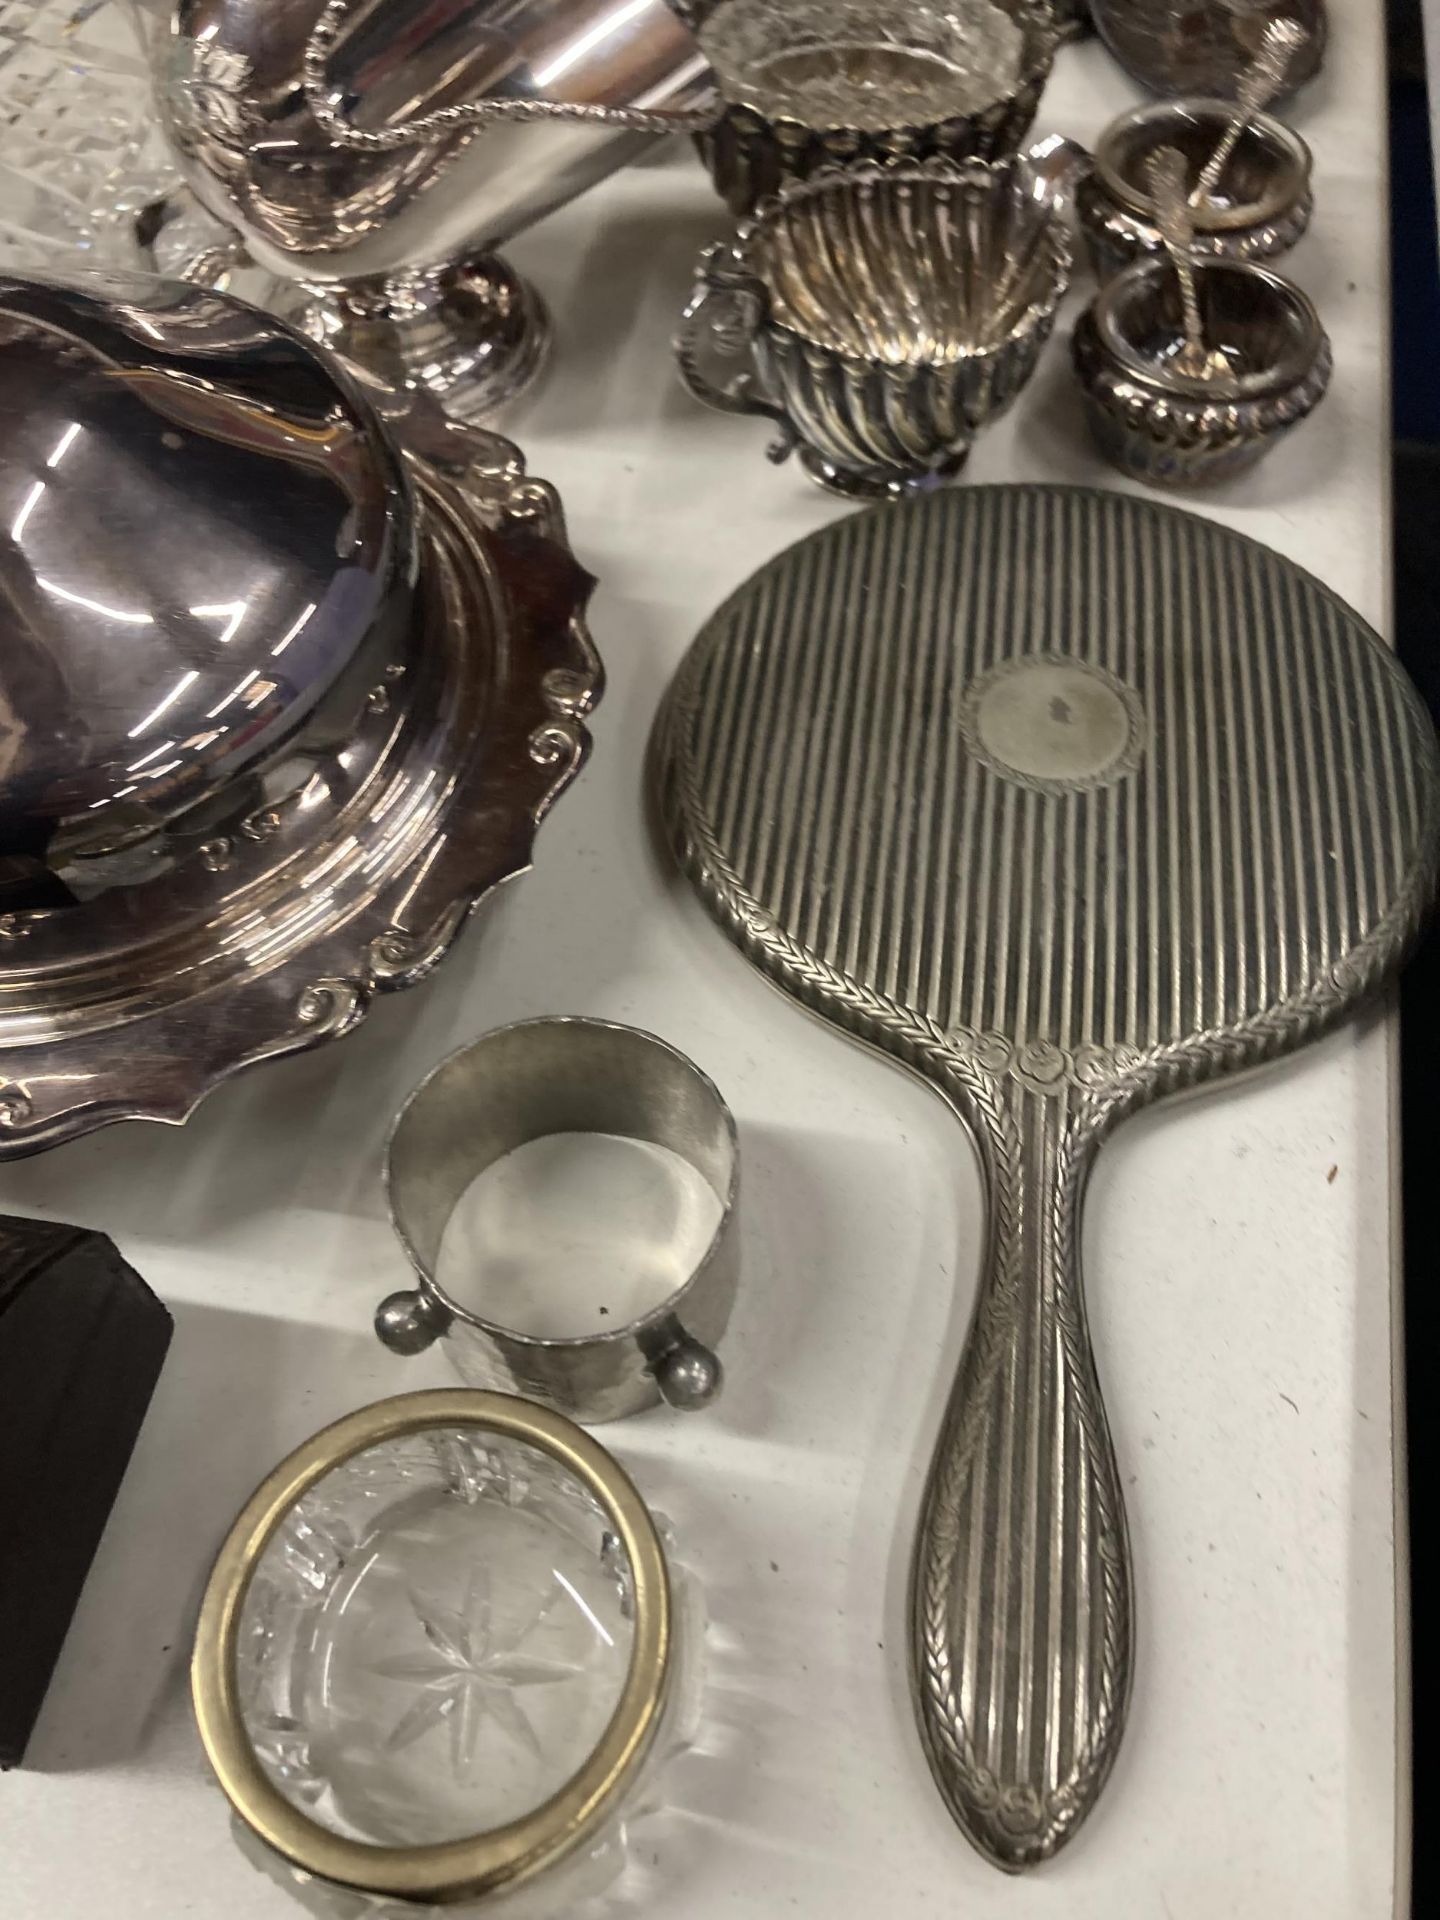 A LARGE QUANTITY OF SILVER PLATE TO INCLUDE A BUTTER DISH, MIRROR, FLOUR SHAKER, TRAY, NAPKINS, - Image 6 of 6